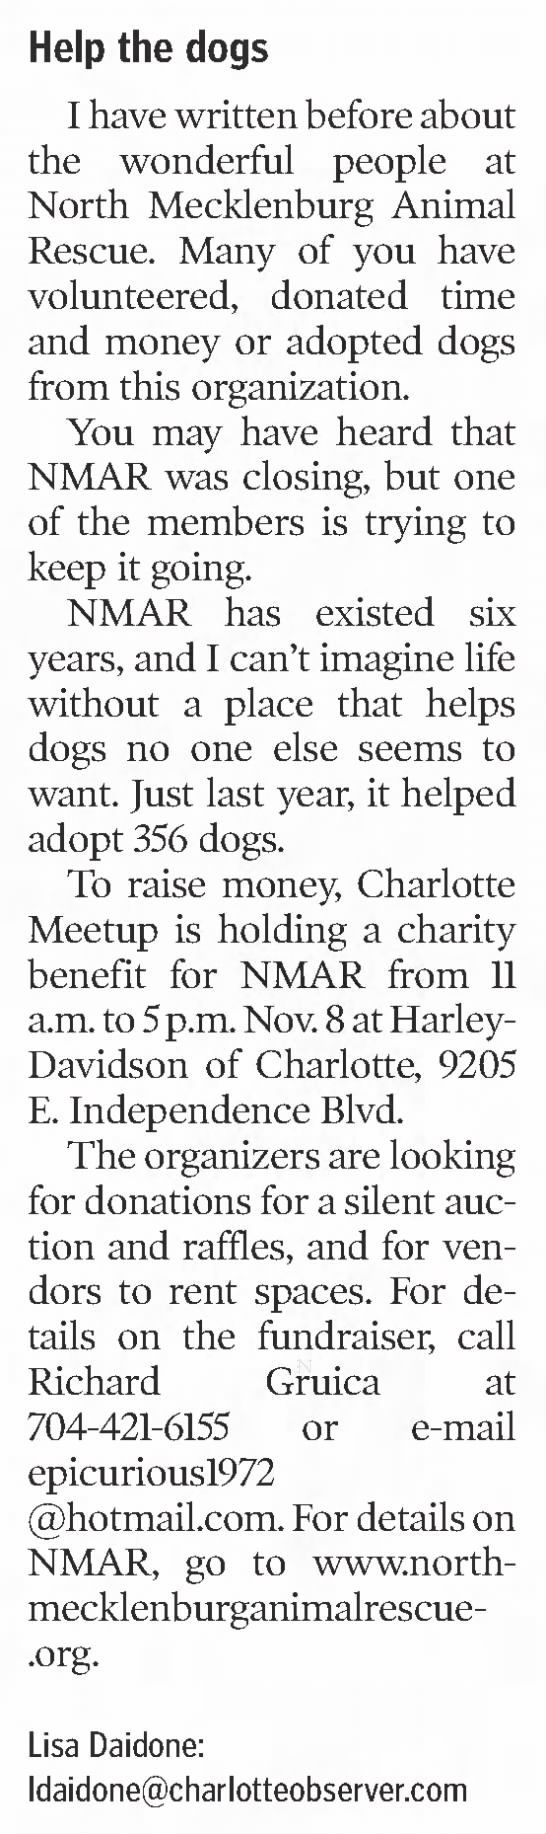 Help the dogs - 